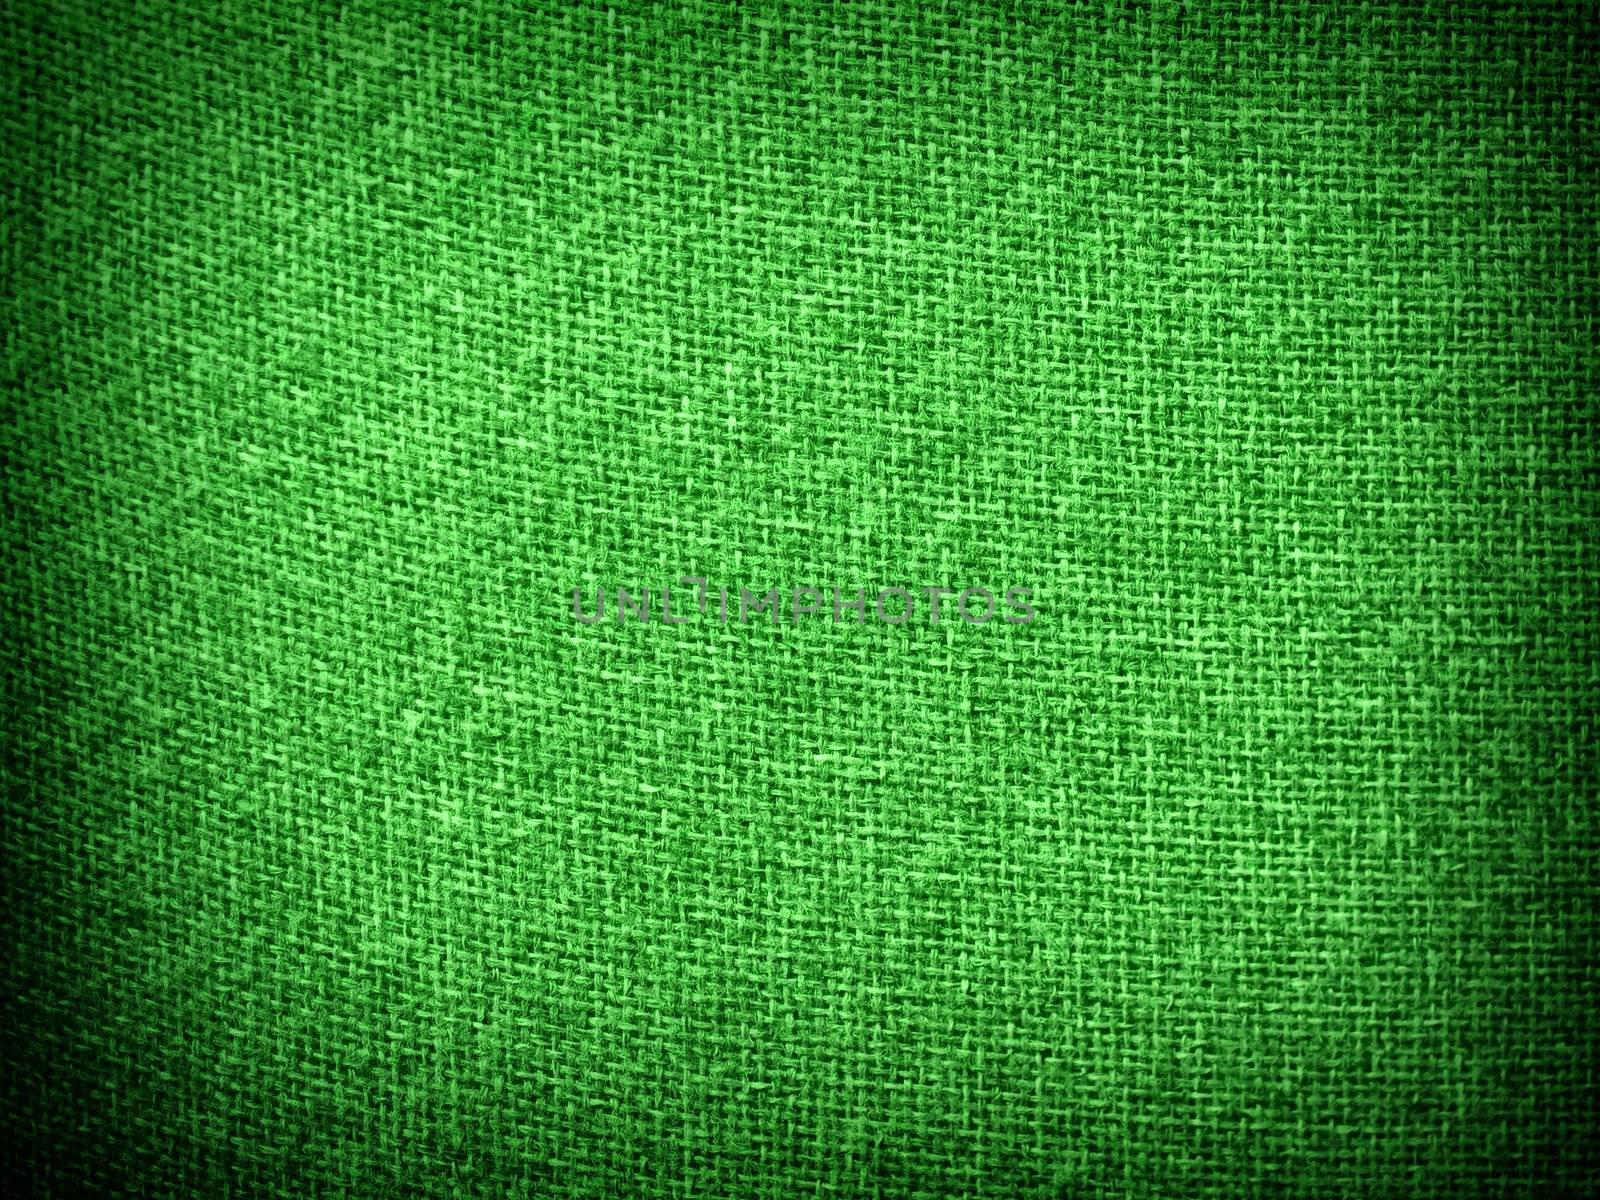 Burlap Green Grunge Texture Background with Framed Copyspace 